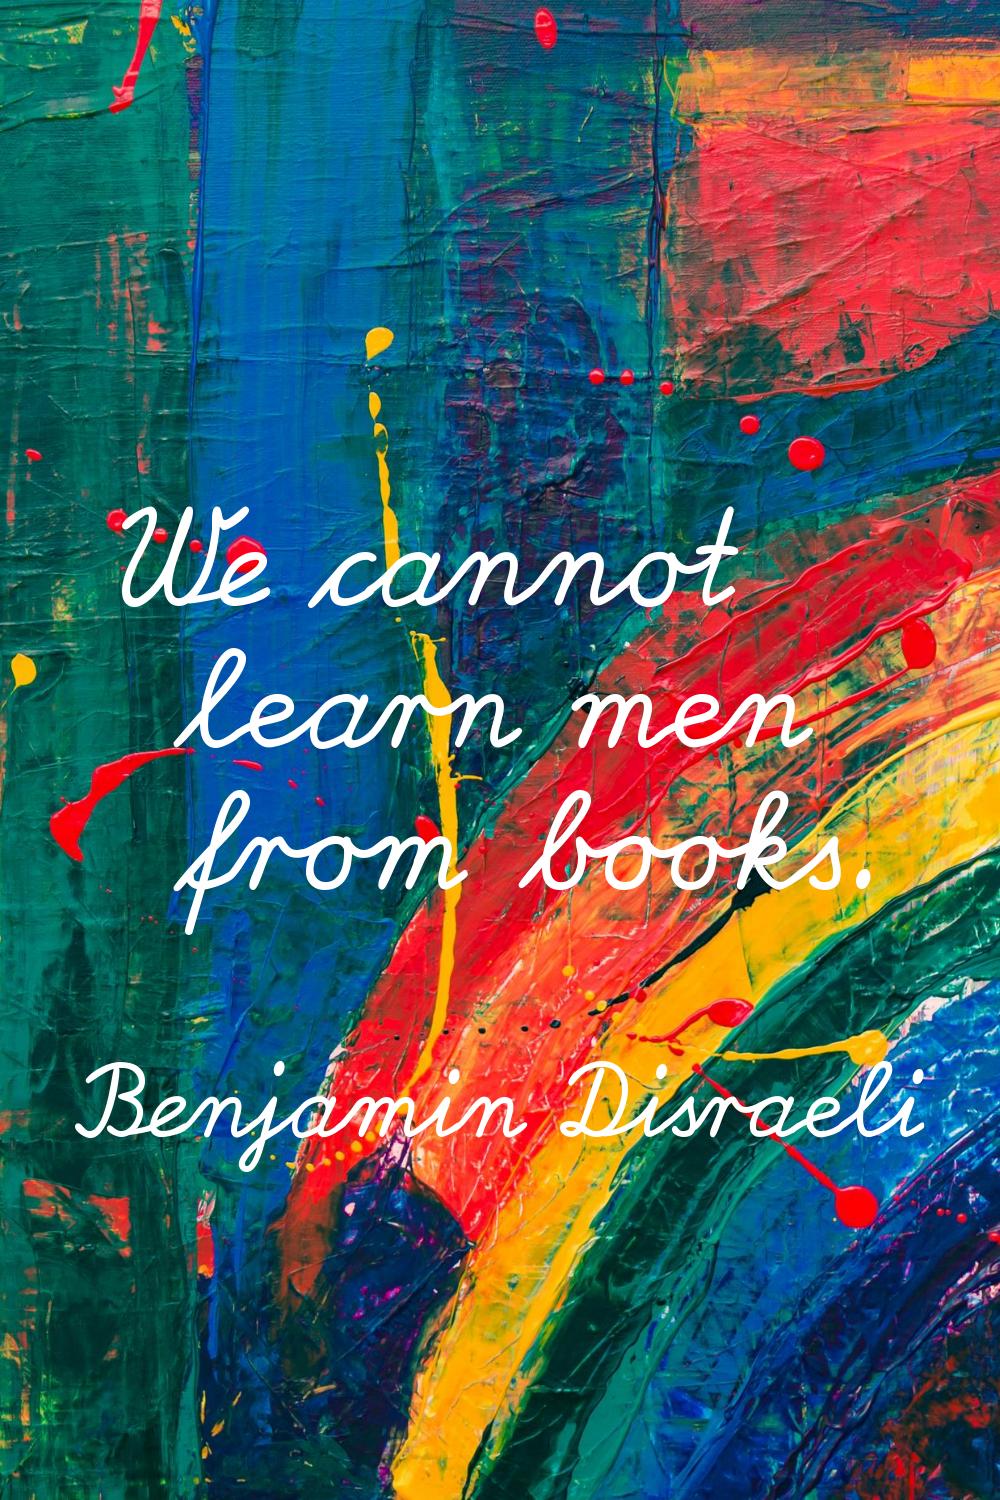 We cannot learn men from books.